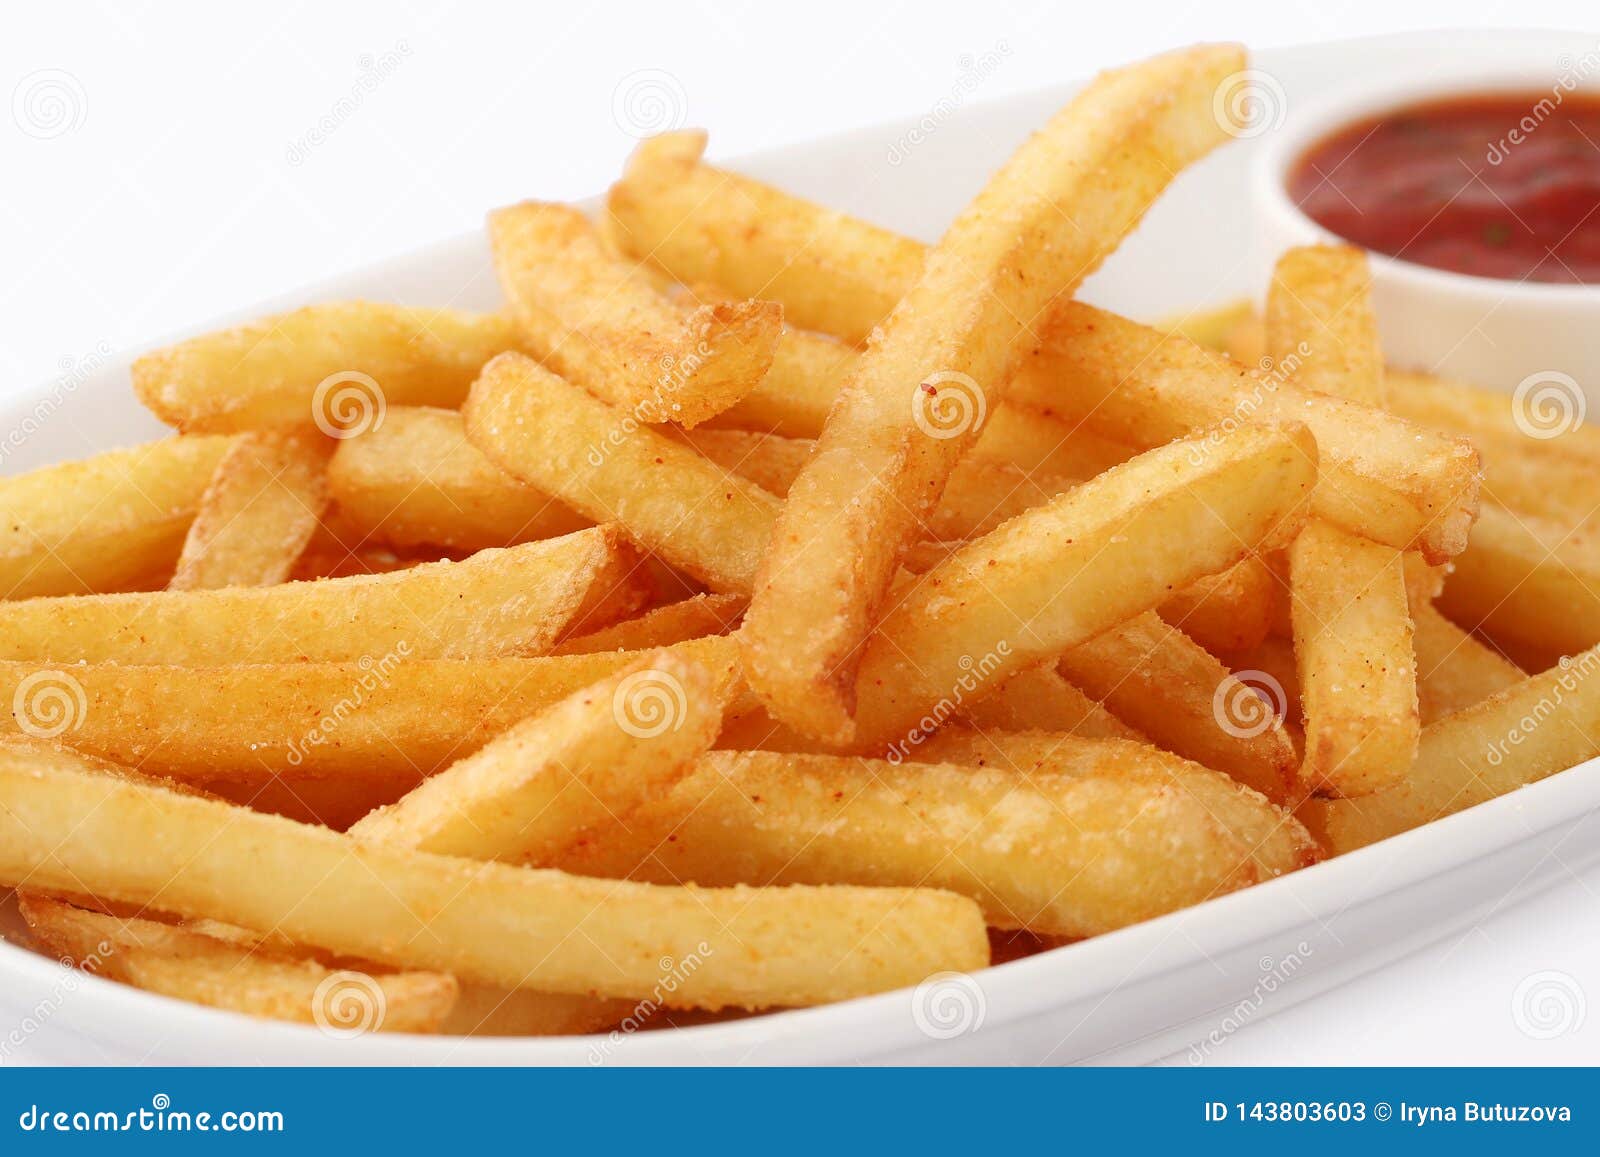 Portion of Freshly Made Pommes Frites Stock Image - Image of fast, gold ...